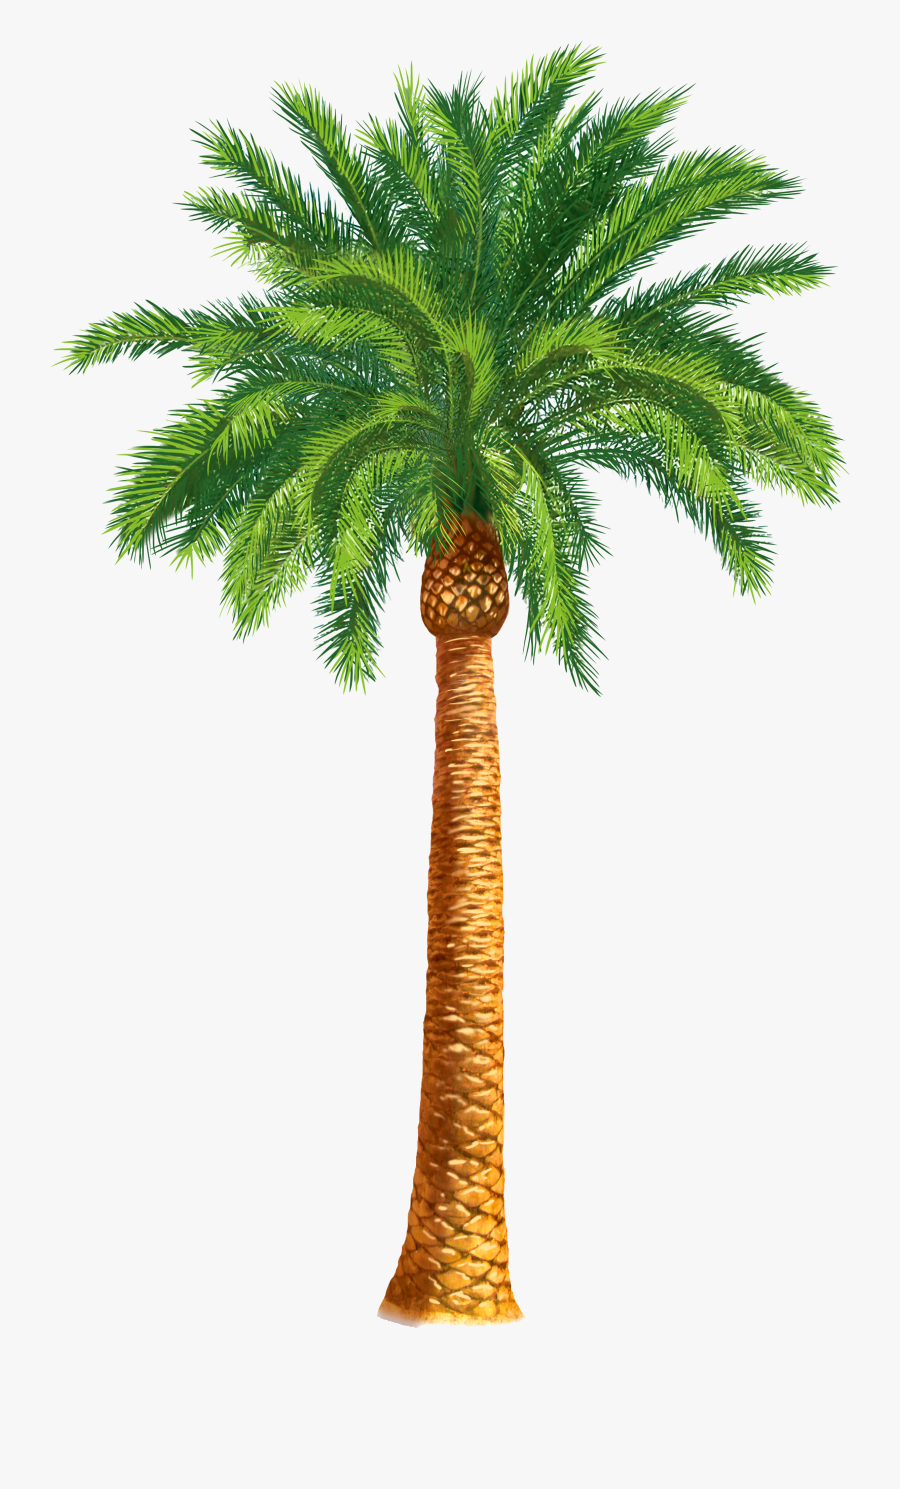 Palm Clipart Date Tree - Date Palm Tree Drawing, Transparent Clipart